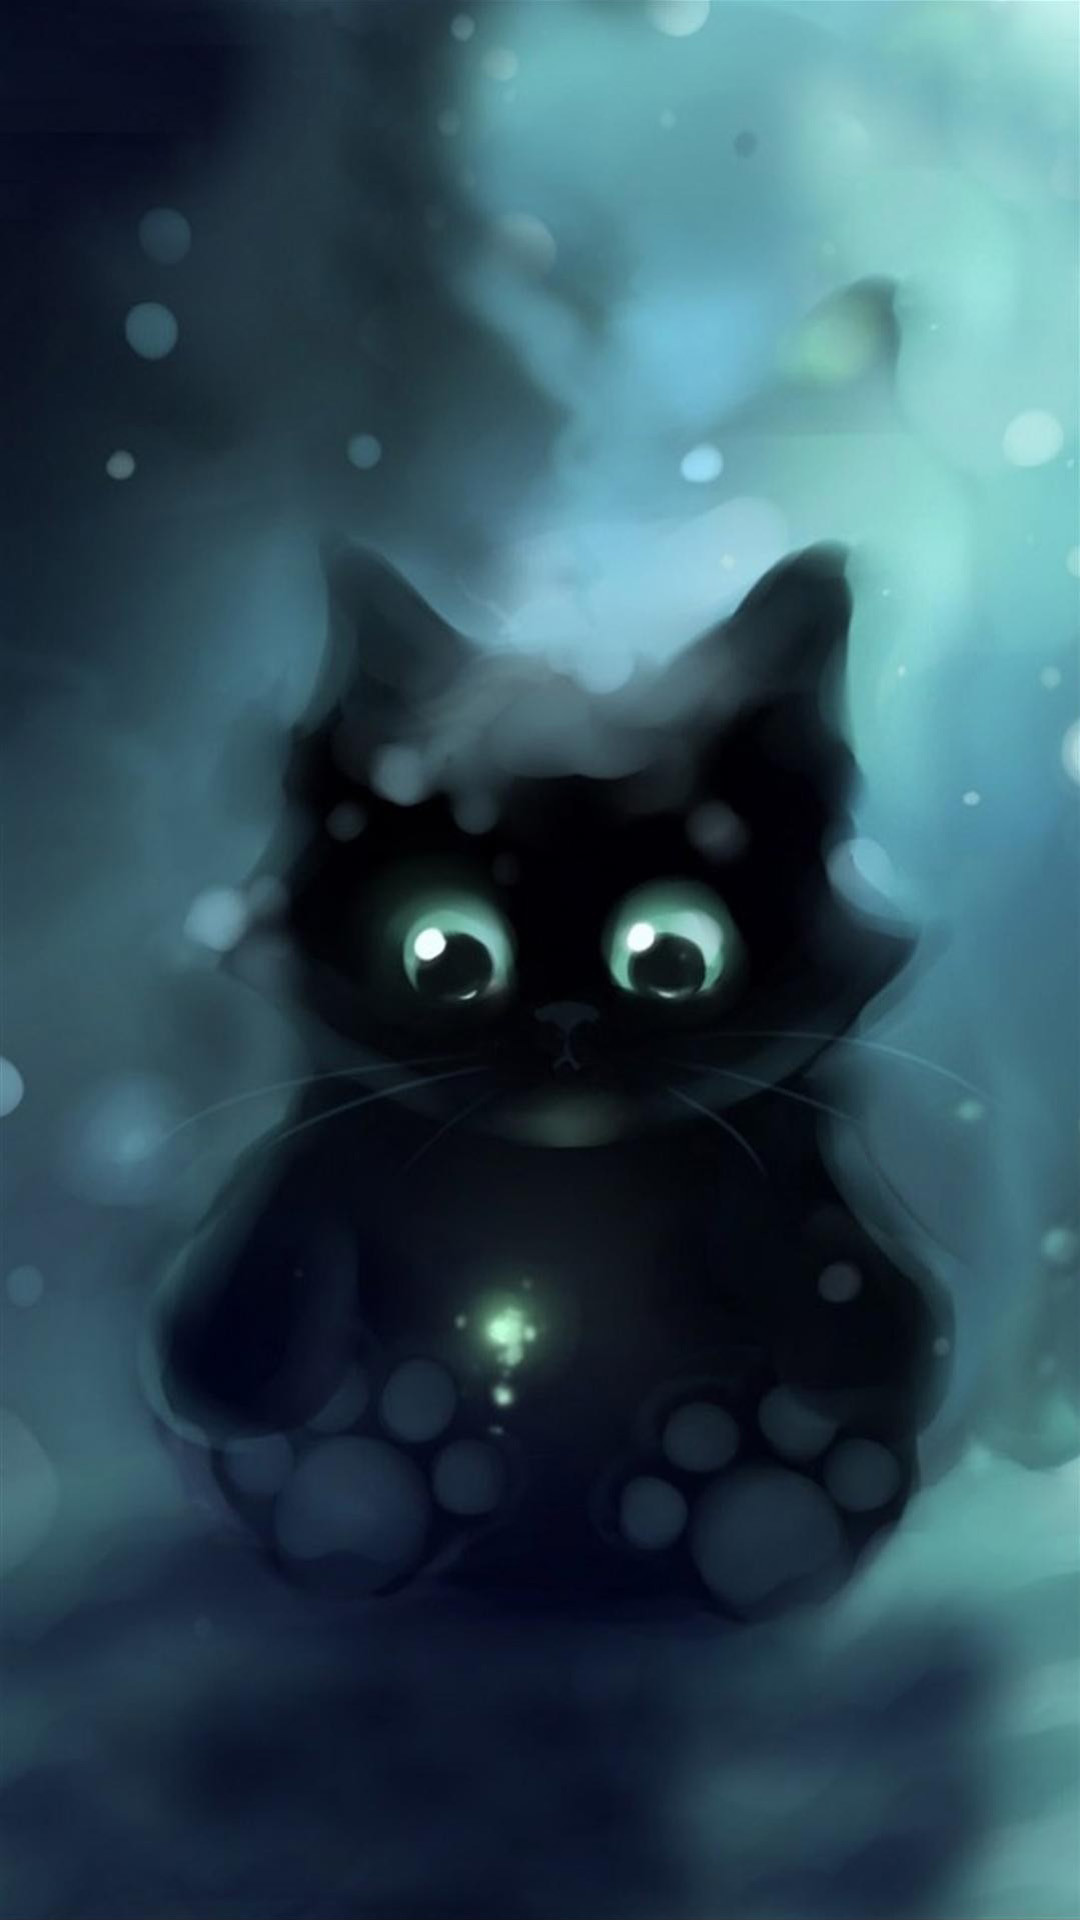 Black Cat Galaxy Note 3 Wallpapers Galaxy Note 3 Wallpapers - Black Cat Wallpaper Iphone - HD Wallpaper 